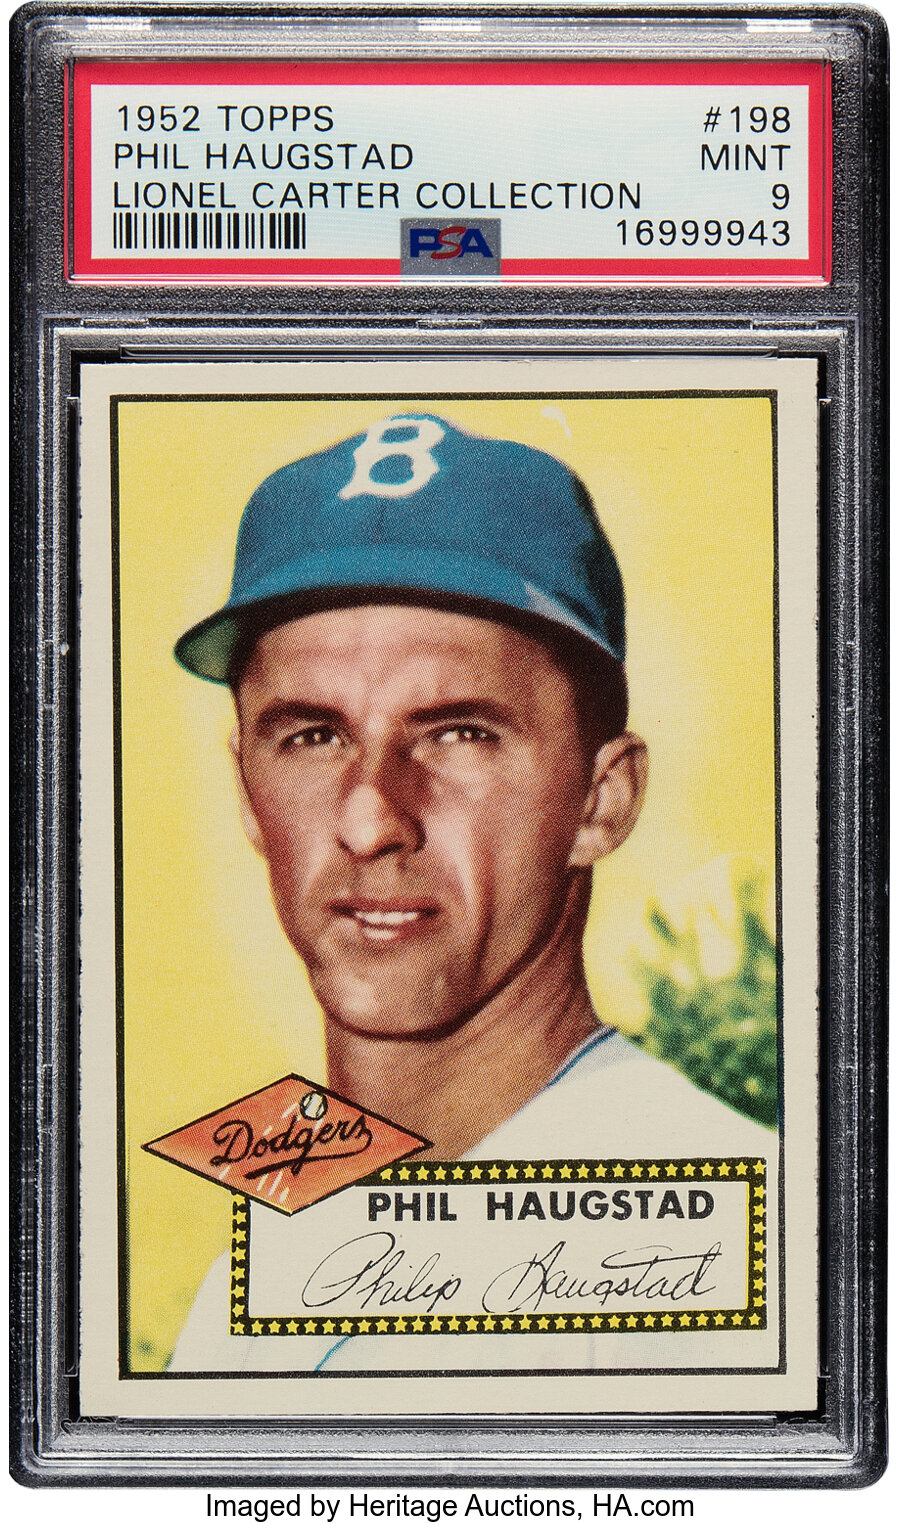 1952 Topps Phil Haugstad Rookie #198 PSA Mint 9 - Pop Five, None Superior! From the Lionel Carter Collection